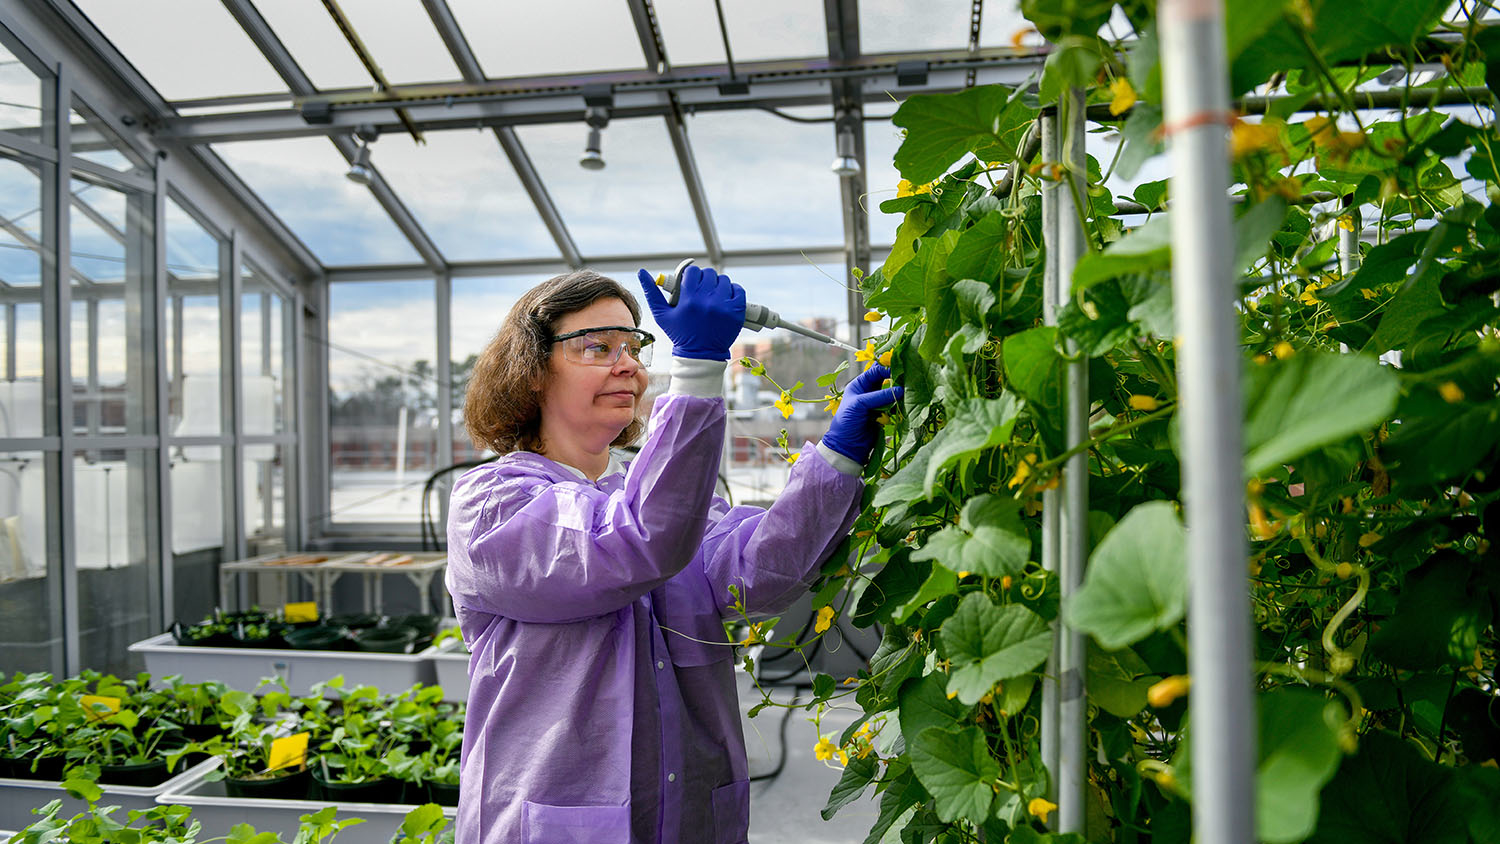 Kellie Burris working with plants in a greenhouse